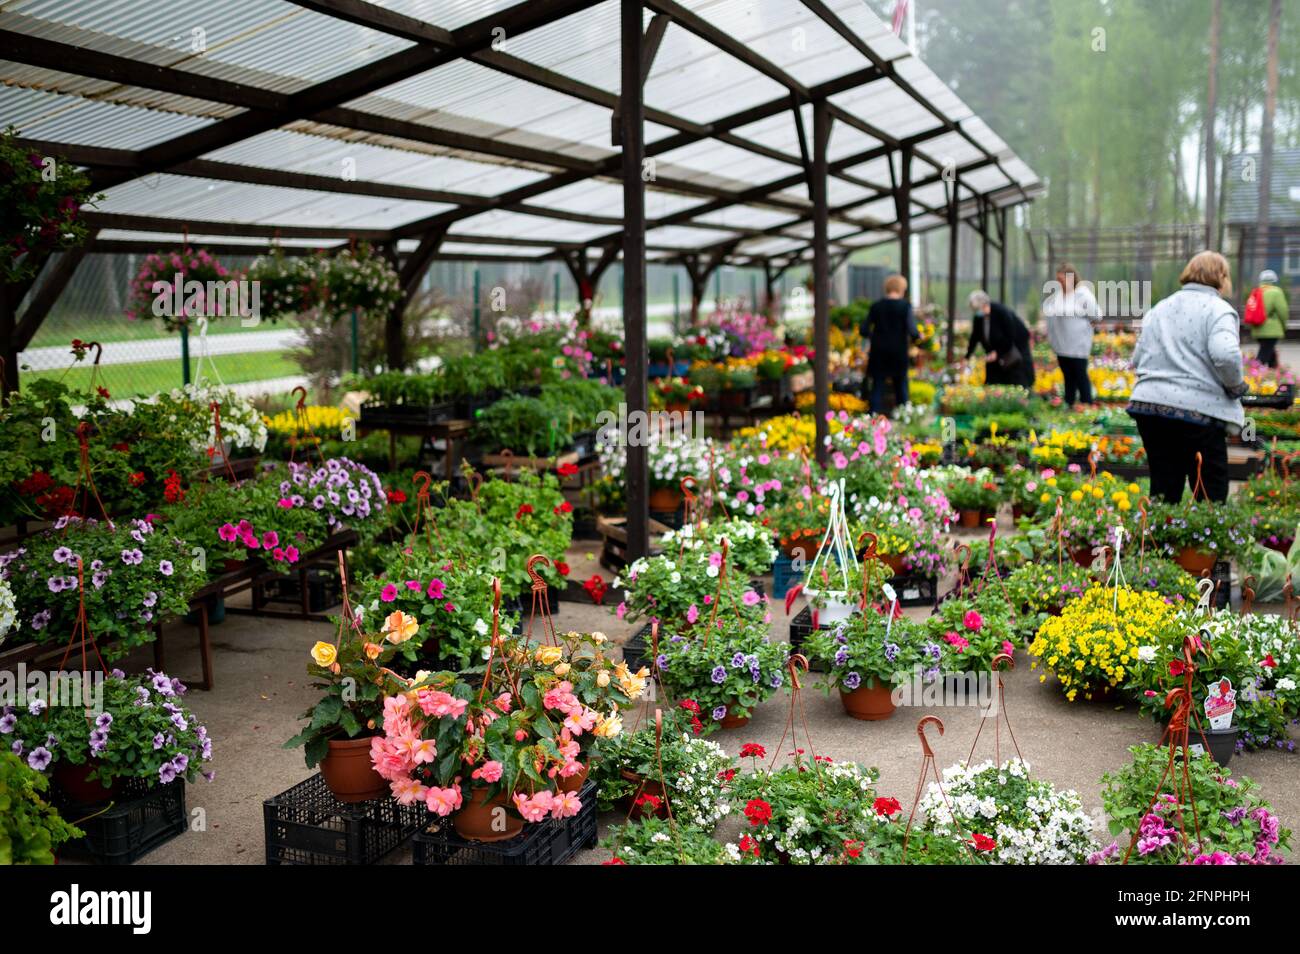 Colourful scene at spring flower market with people shopping for spring flowers for their gardens Stock Photo